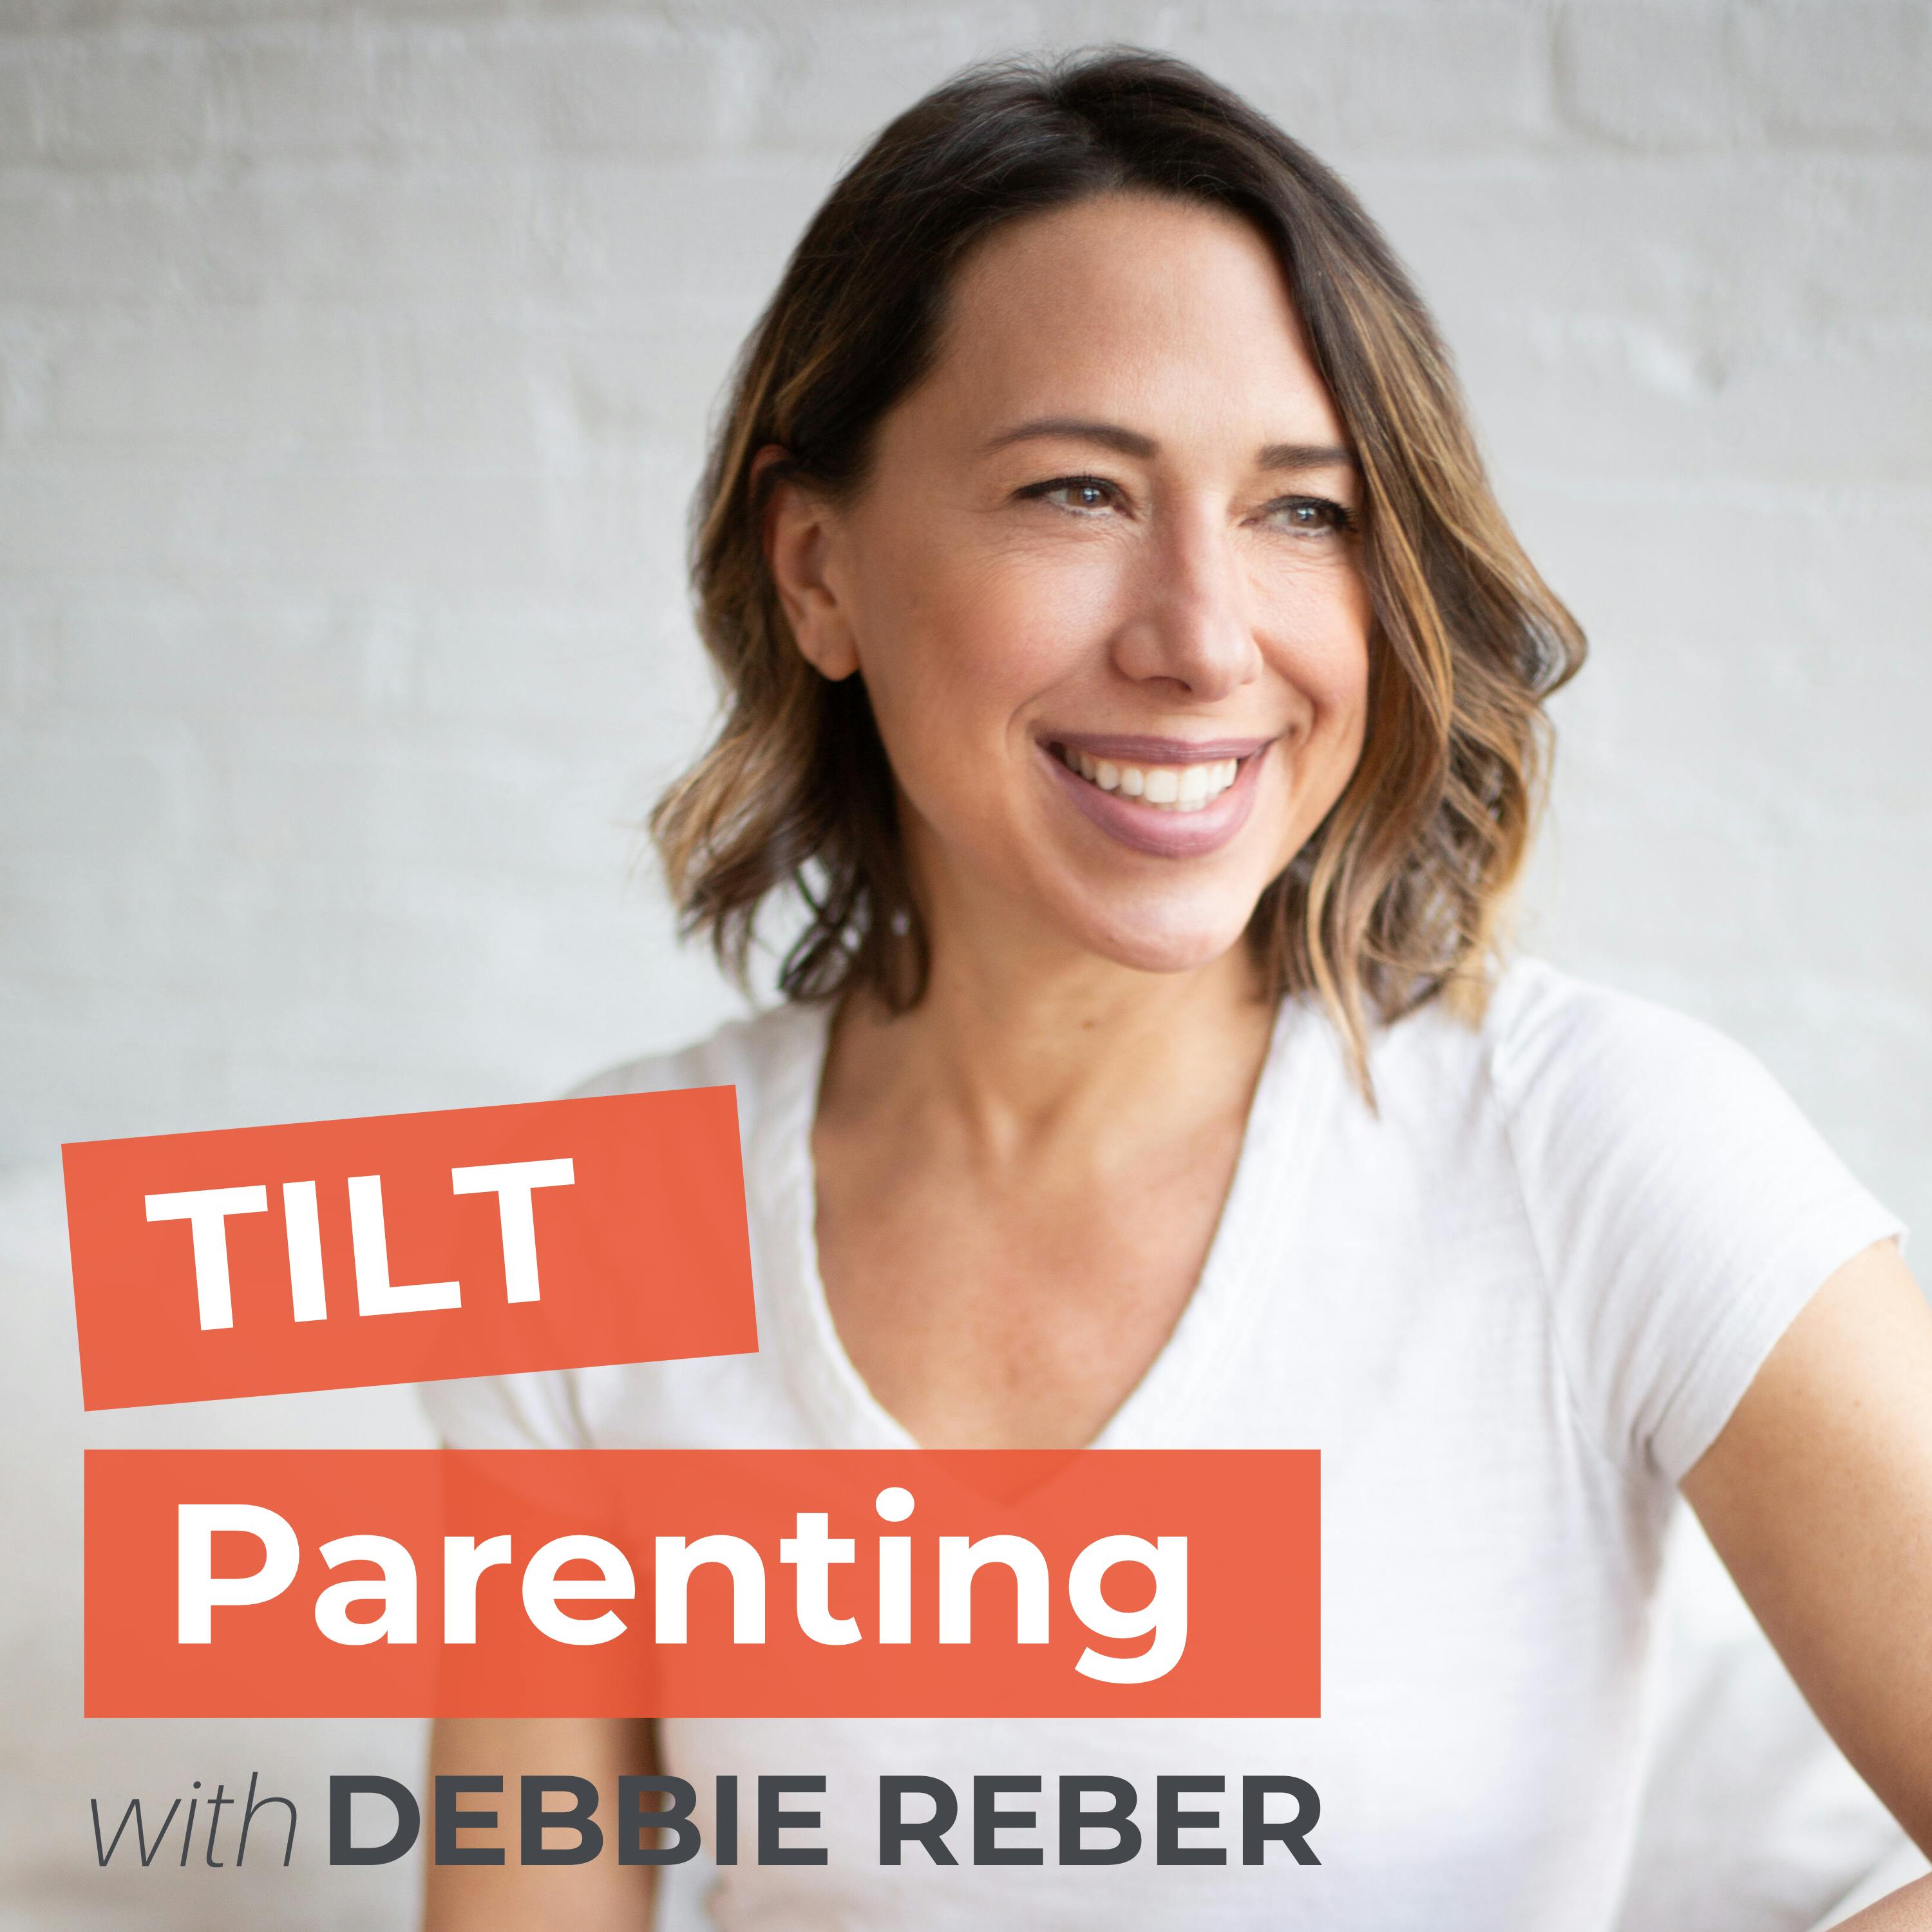 TPP 150: Heather Turgeon and Julie Wright On Handling Common Parenting Dilemmas